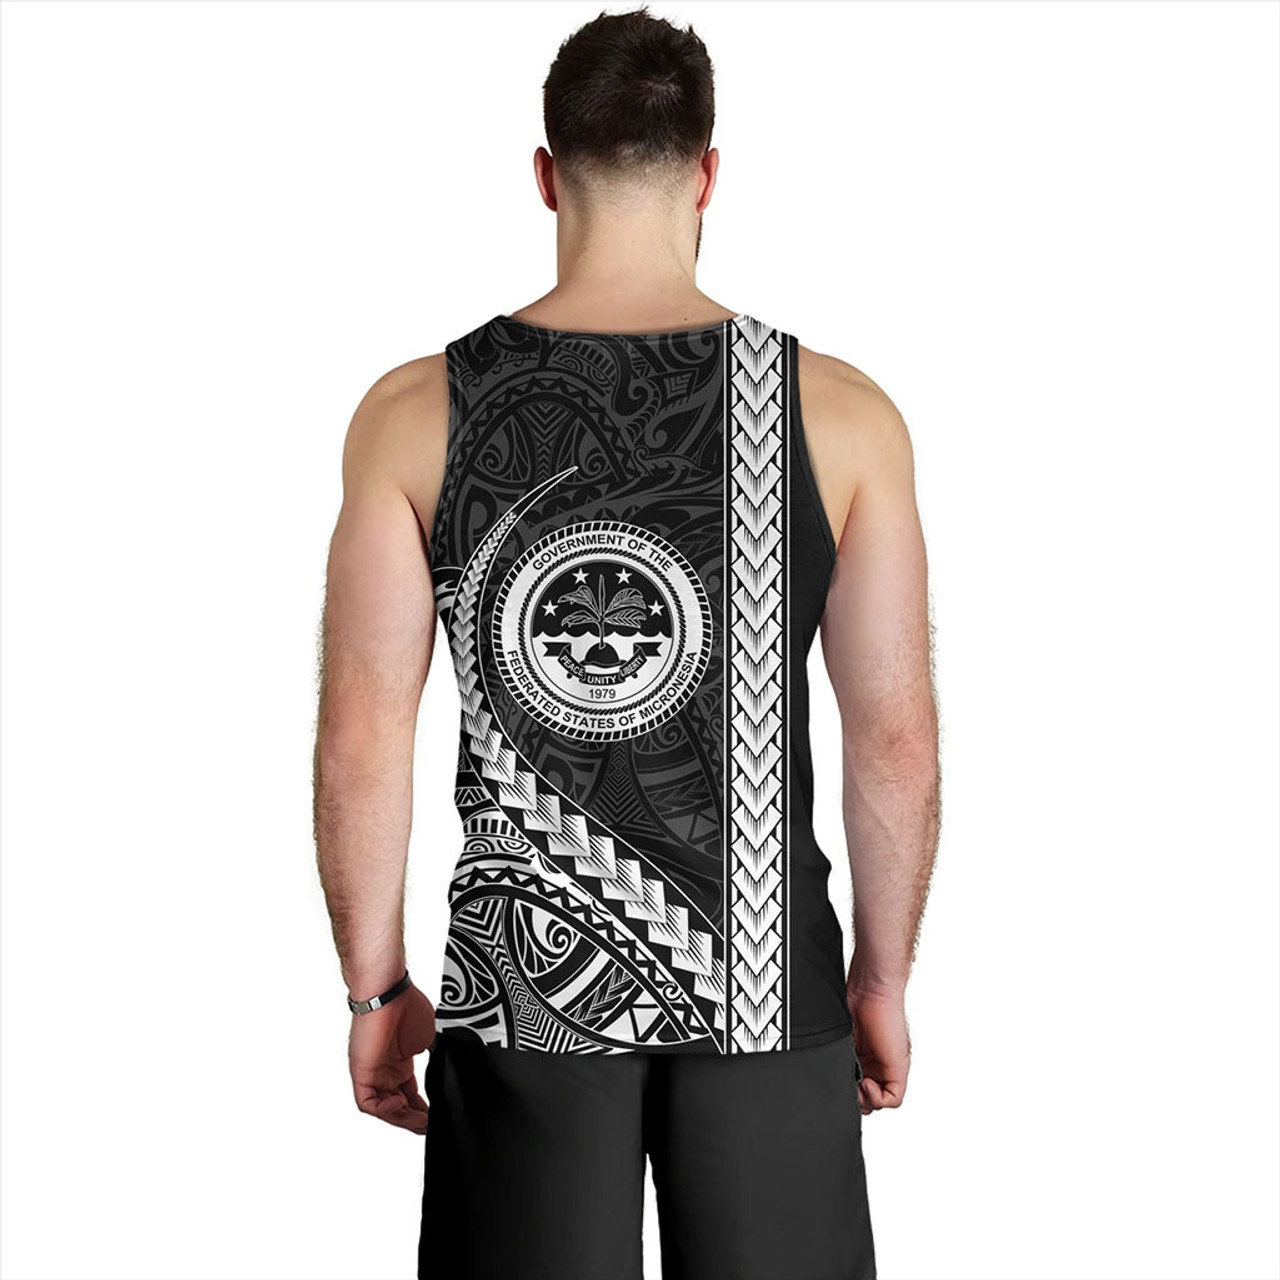 Federated States Of Micronesia Tank Top Tribal Micronesian Coat Of Arms